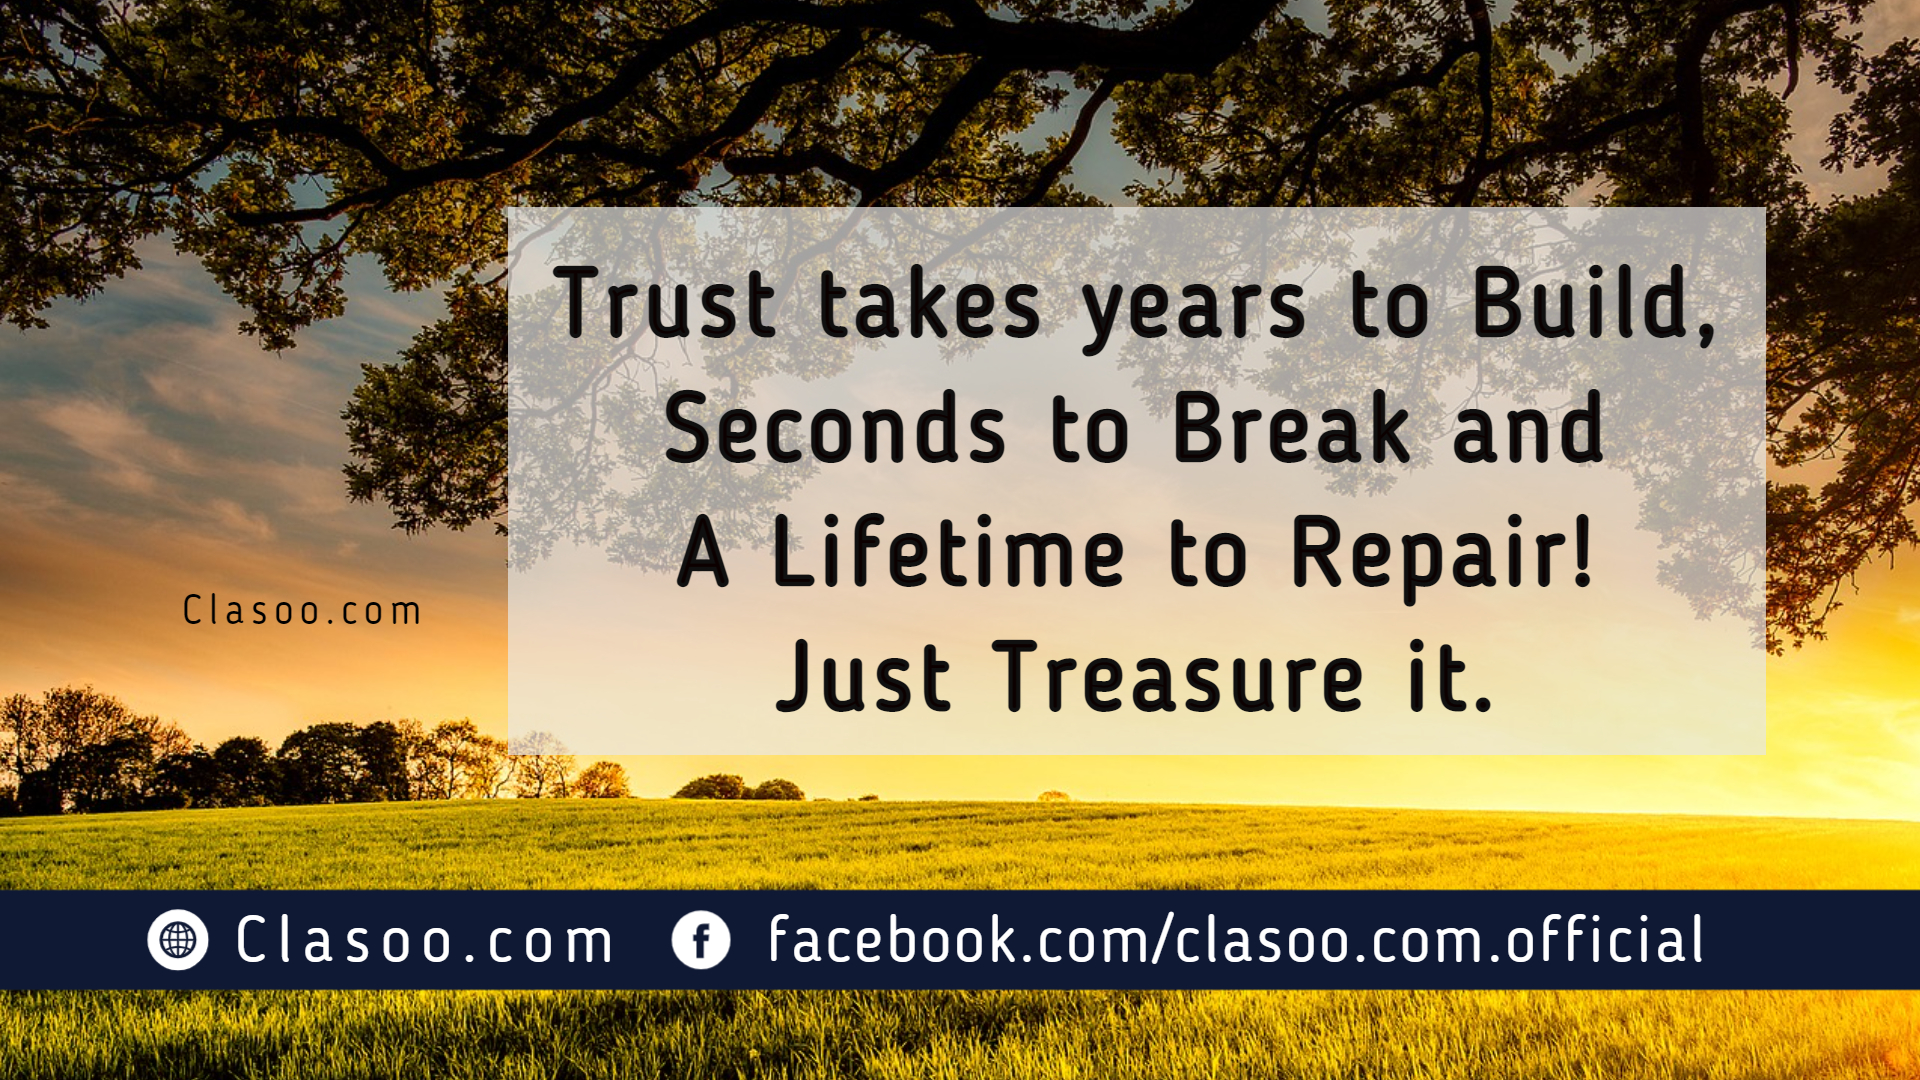 Trust takes years to build, seconds to break and a Lifetime to repair. Just treasure it!